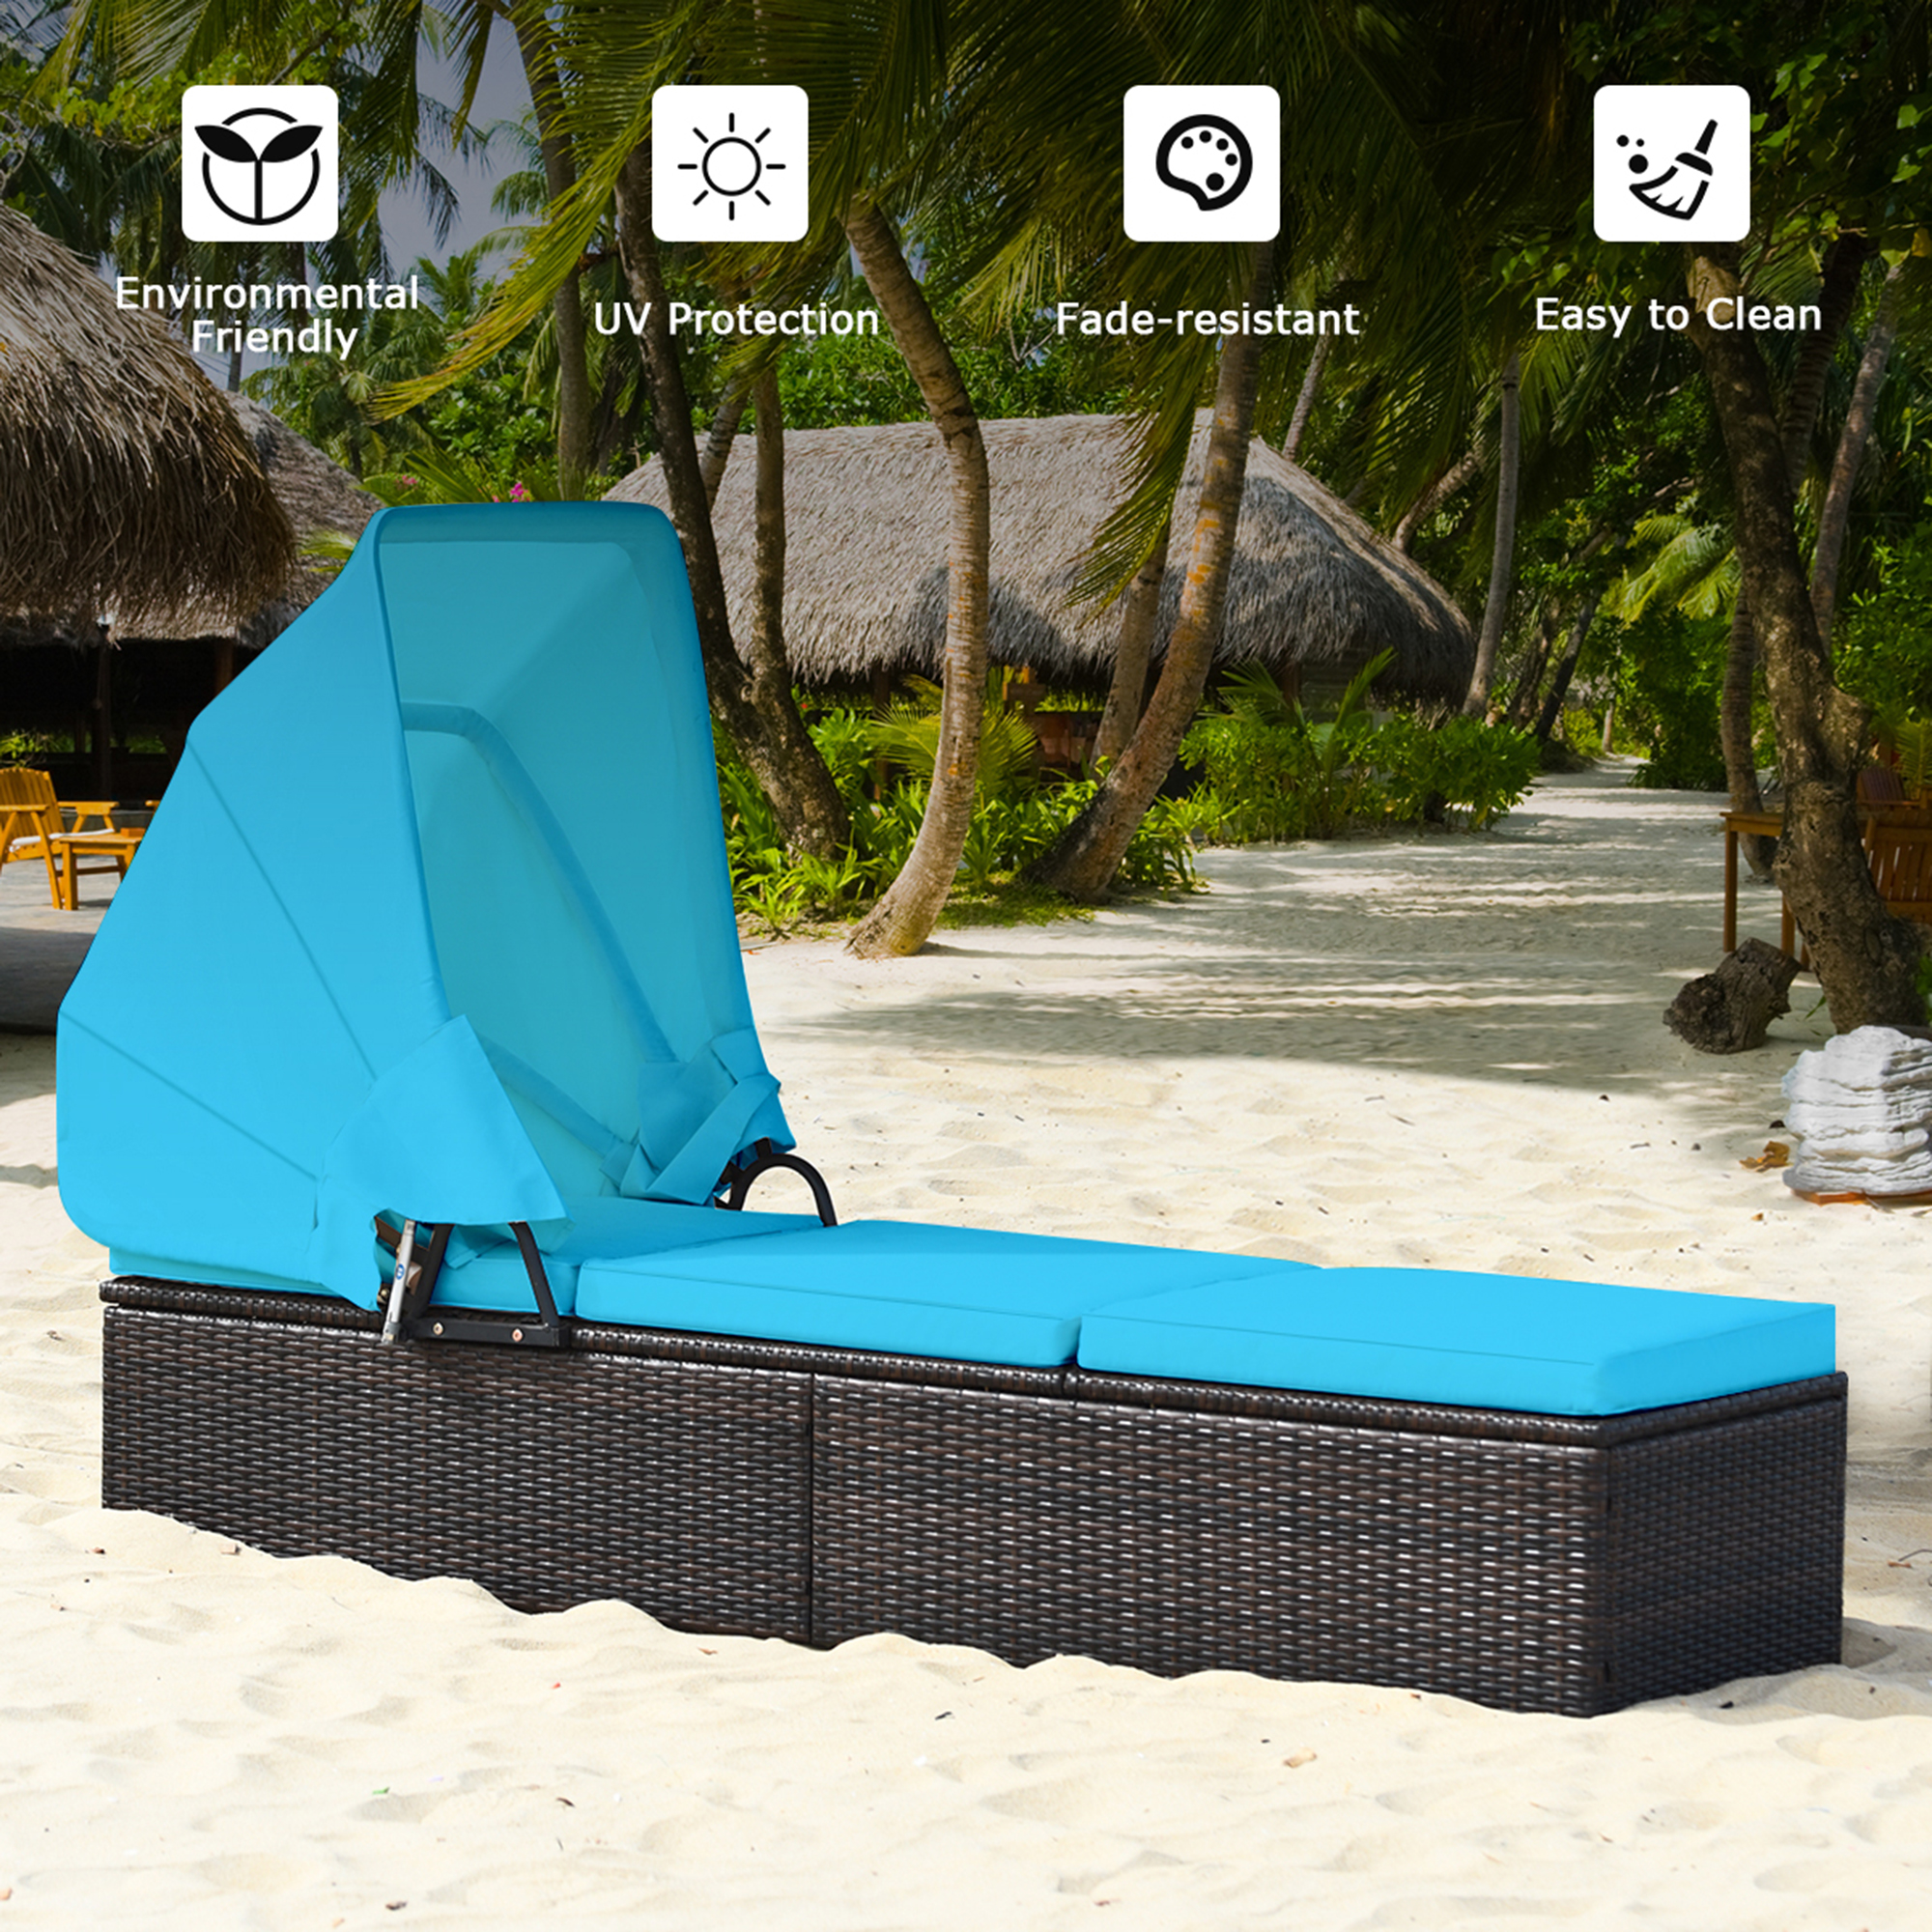 Gymax 2PCS Rattan Patio Chaise Lounge Chair W/ Adjustable Canopy Turquoise Cushion - image 5 of 10